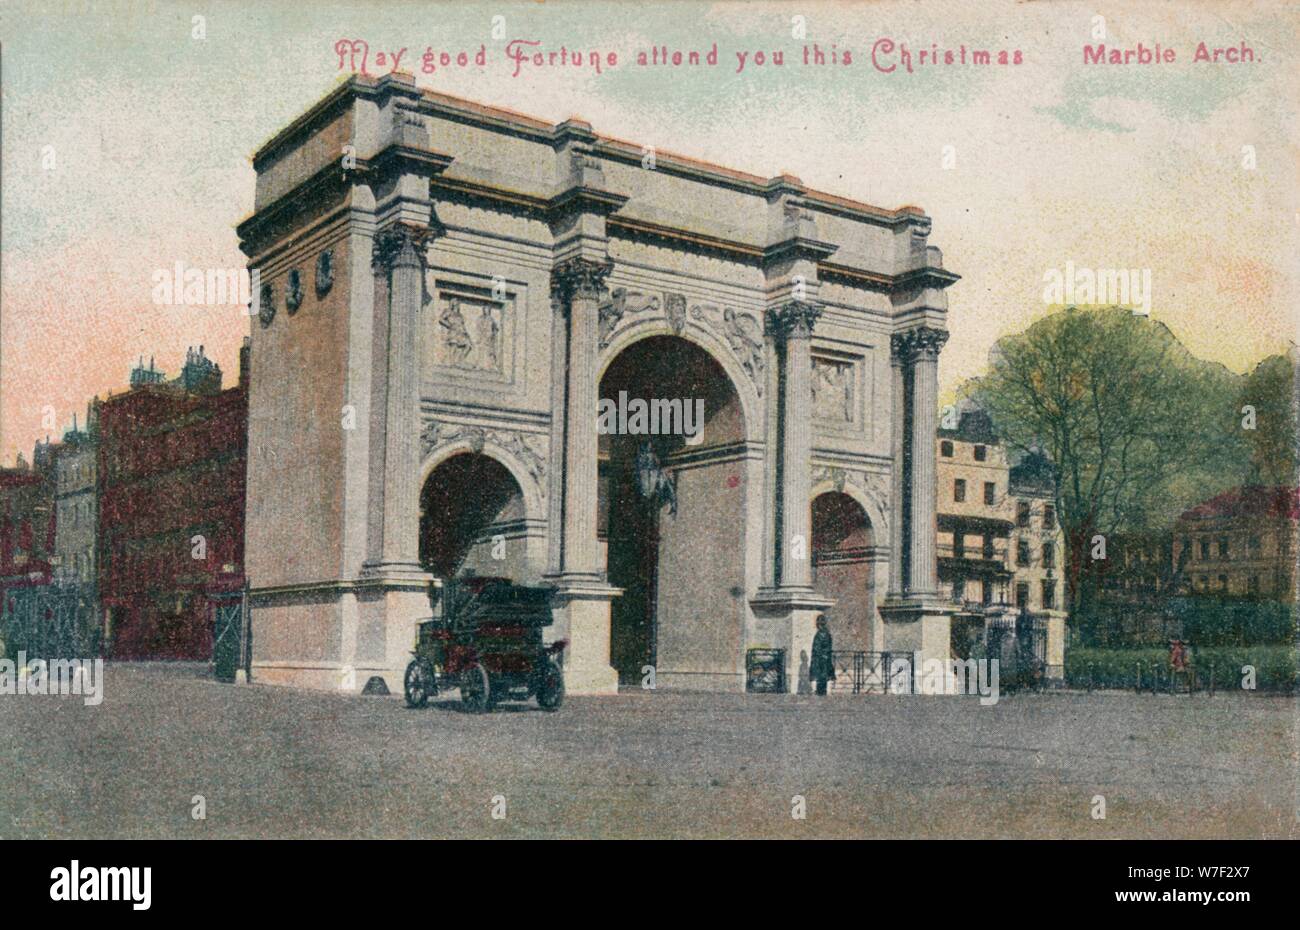 'May good fortune attend you this Christmas - Marble Arch', c1910. Artist: Unknown. Stock Photo